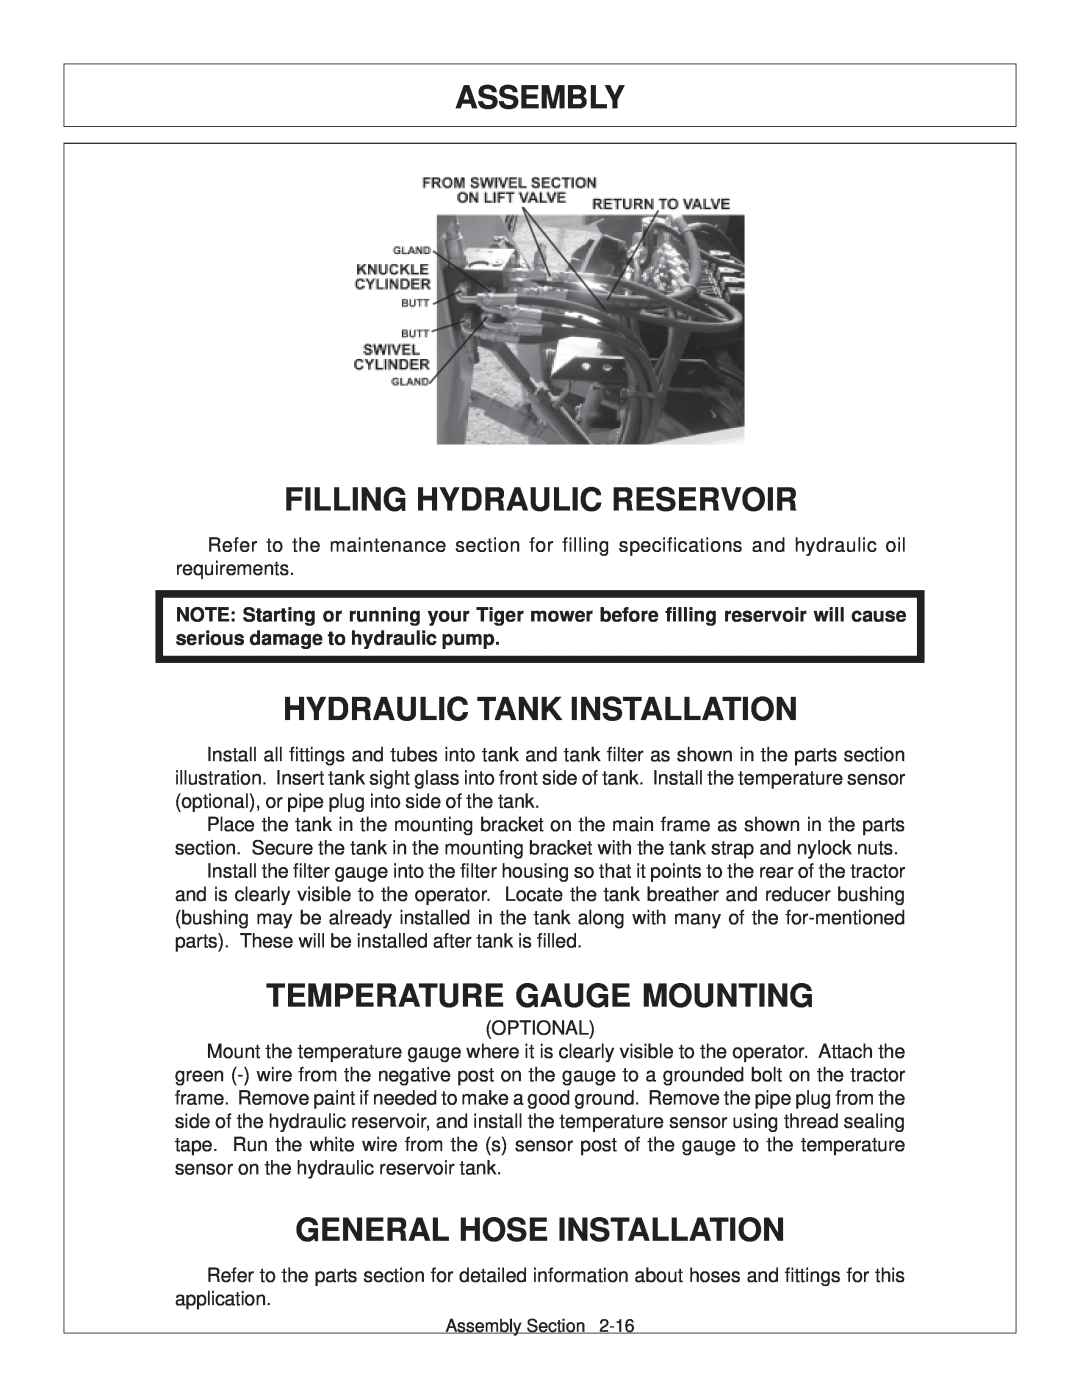 Tiger JD 62-6420 manual Filling Hydraulic Reservoir, Hydraulic Tank Installation, Temperature Gauge Mounting, Assembly 